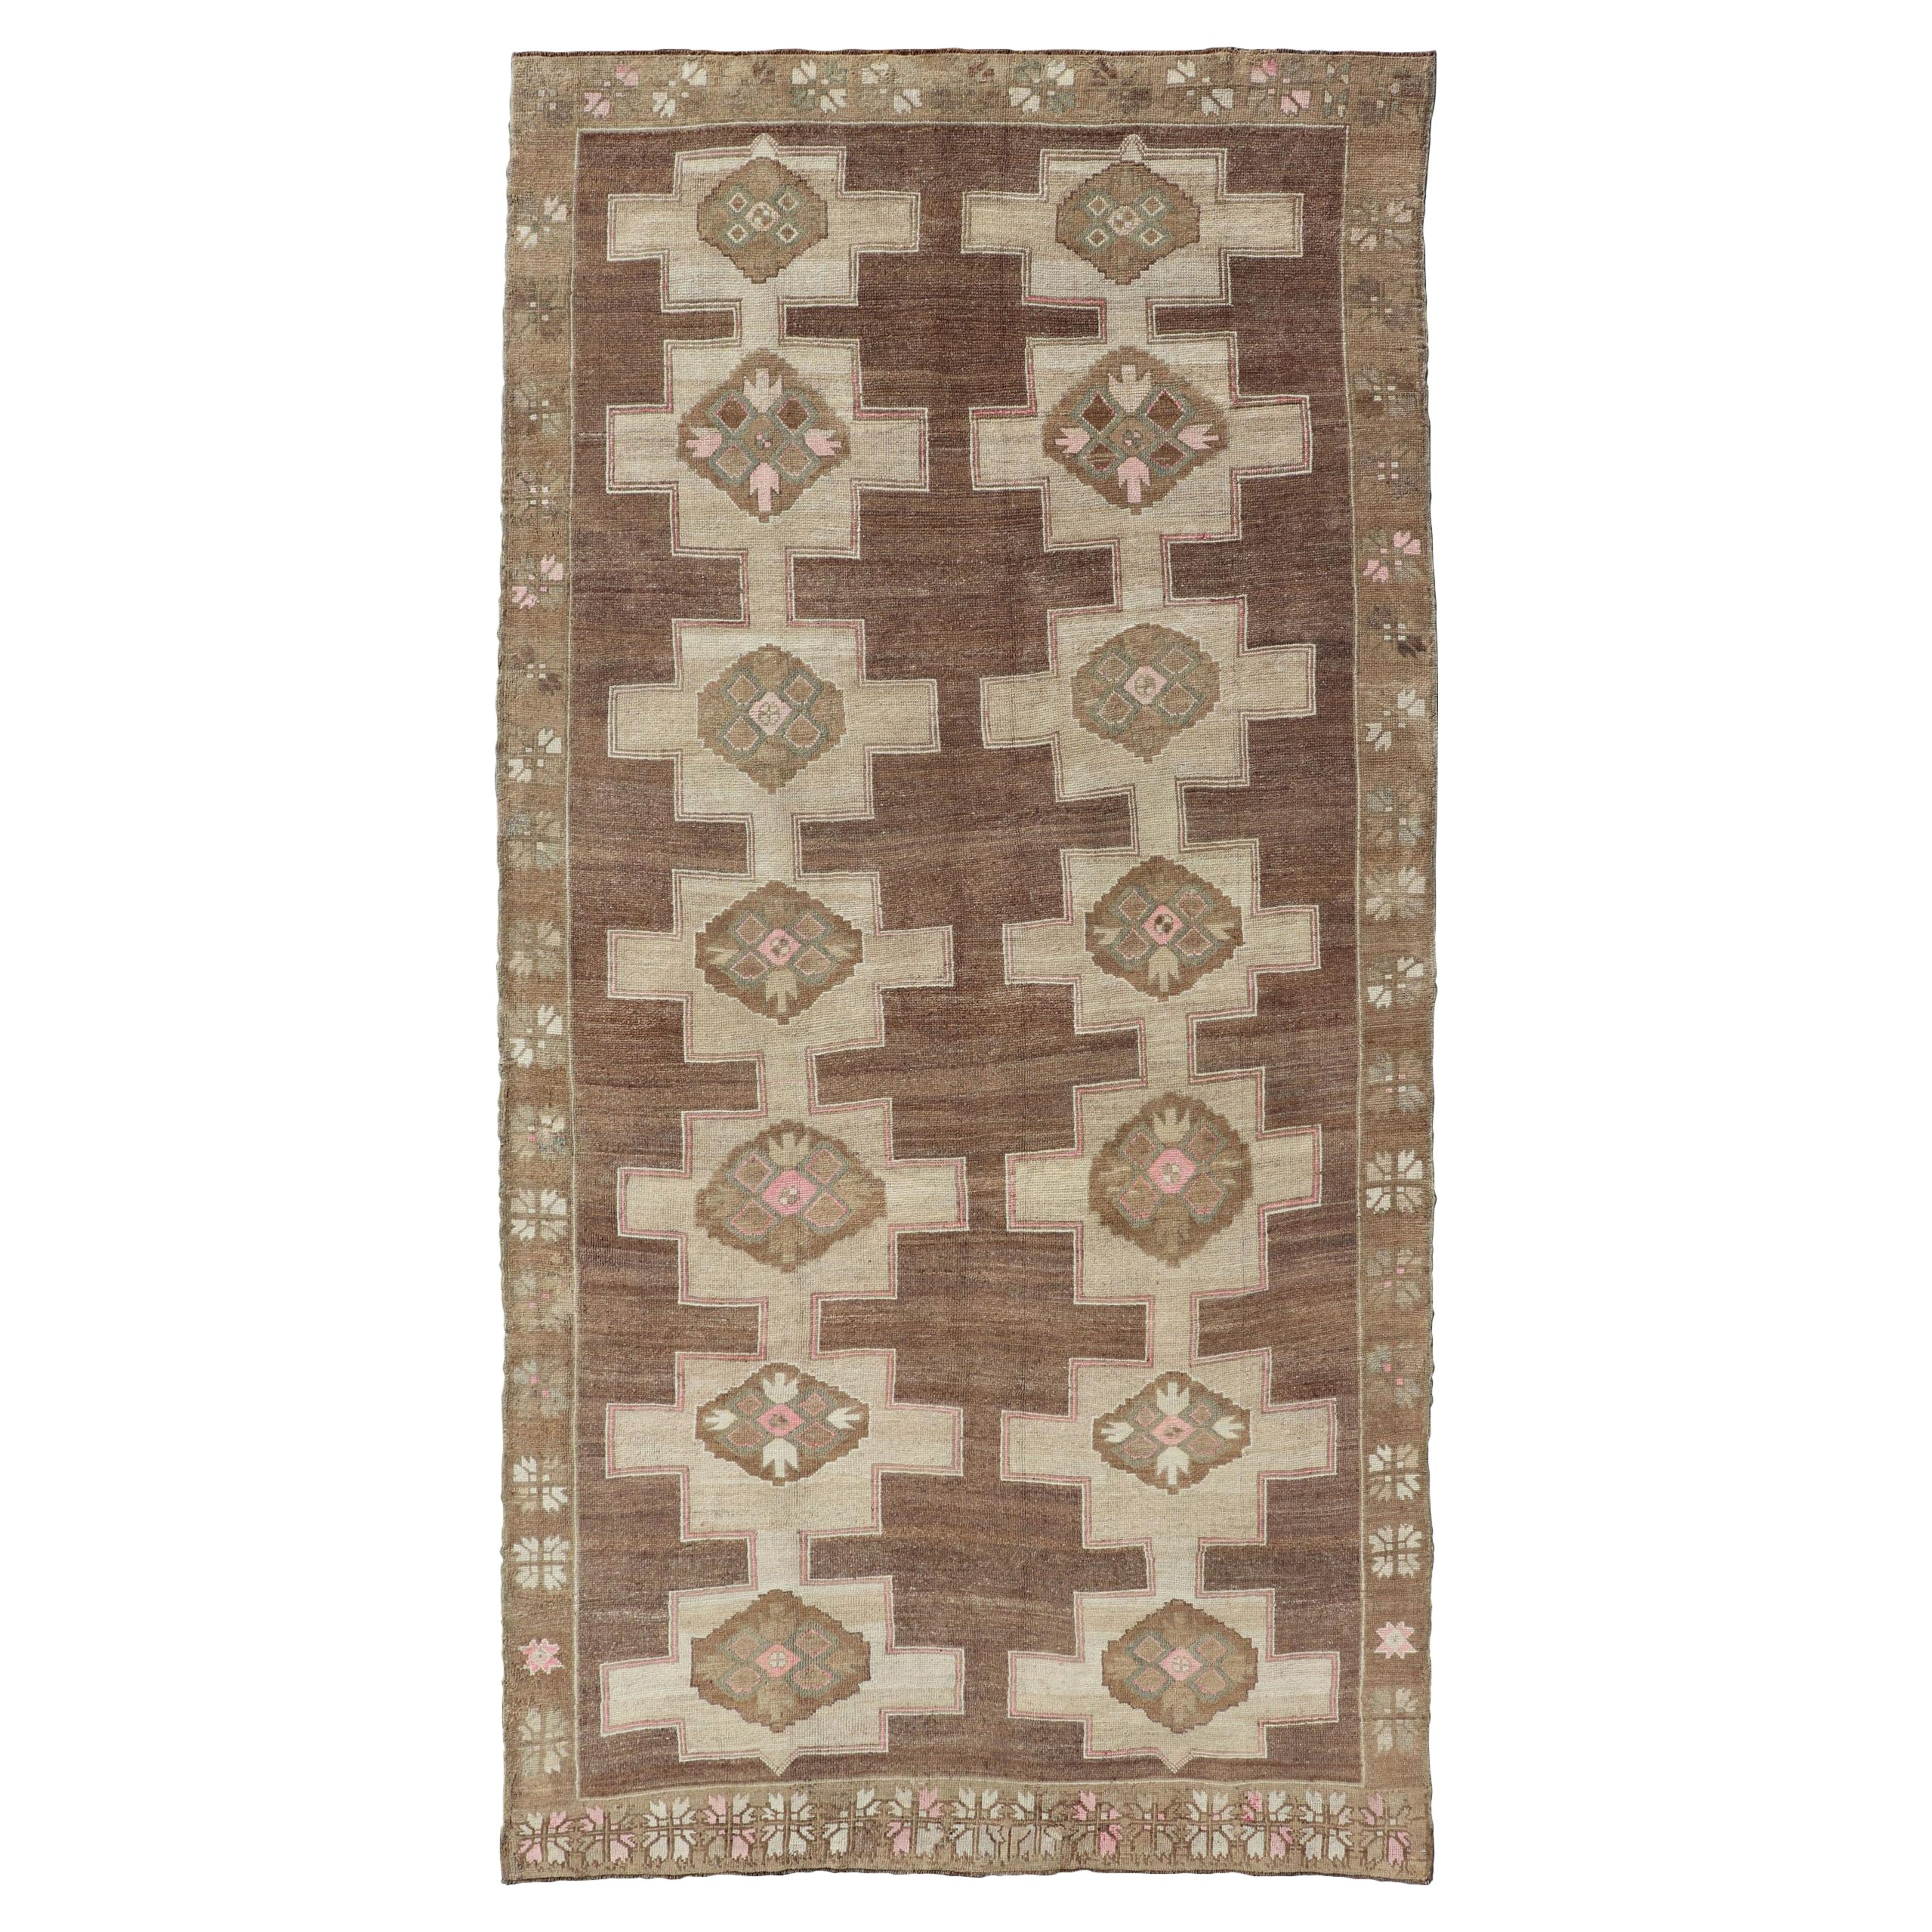 Vintage Kars Wide Gallery Rug in Brown Colors, Tan, Taupe and Light Green